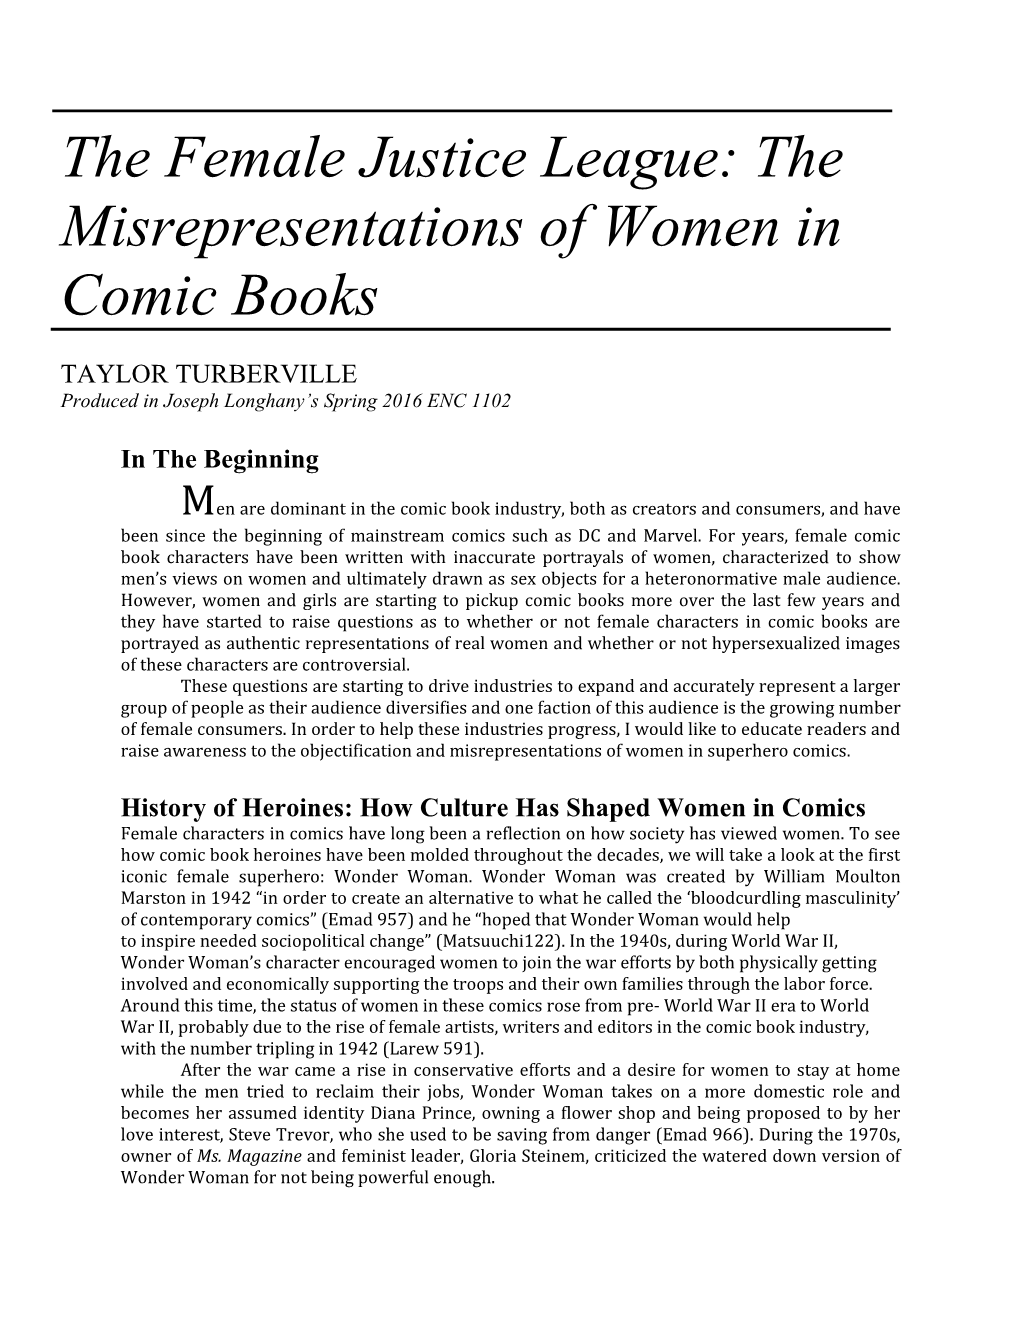 The Misrepresentations of Women in Comic Books